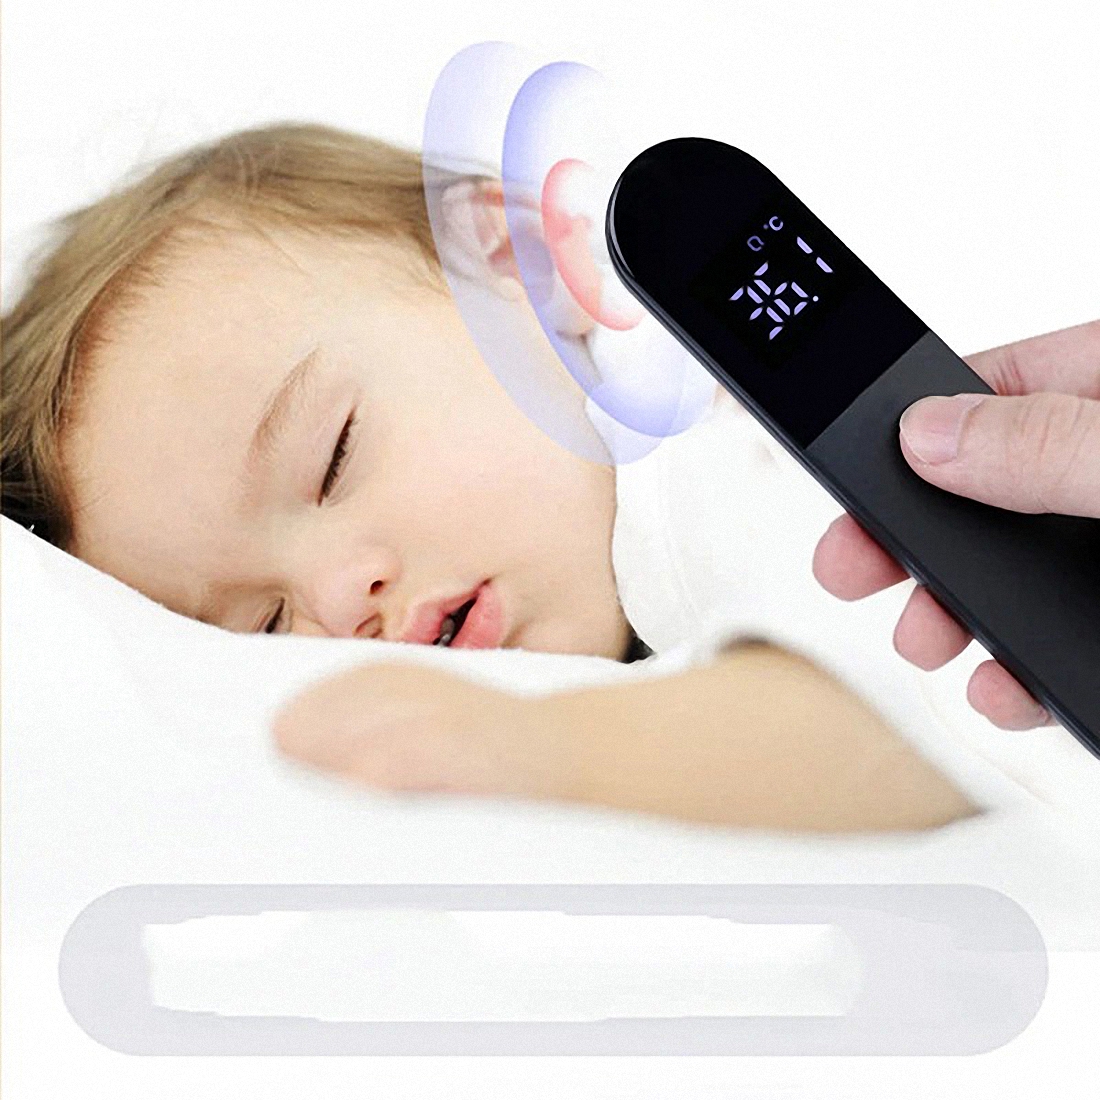 Firefly Non-contact Infrared Forehead Body Thermometer Adults Children Body Temperature Fever Measure Tool Digital LED Medical Thermometer (8)